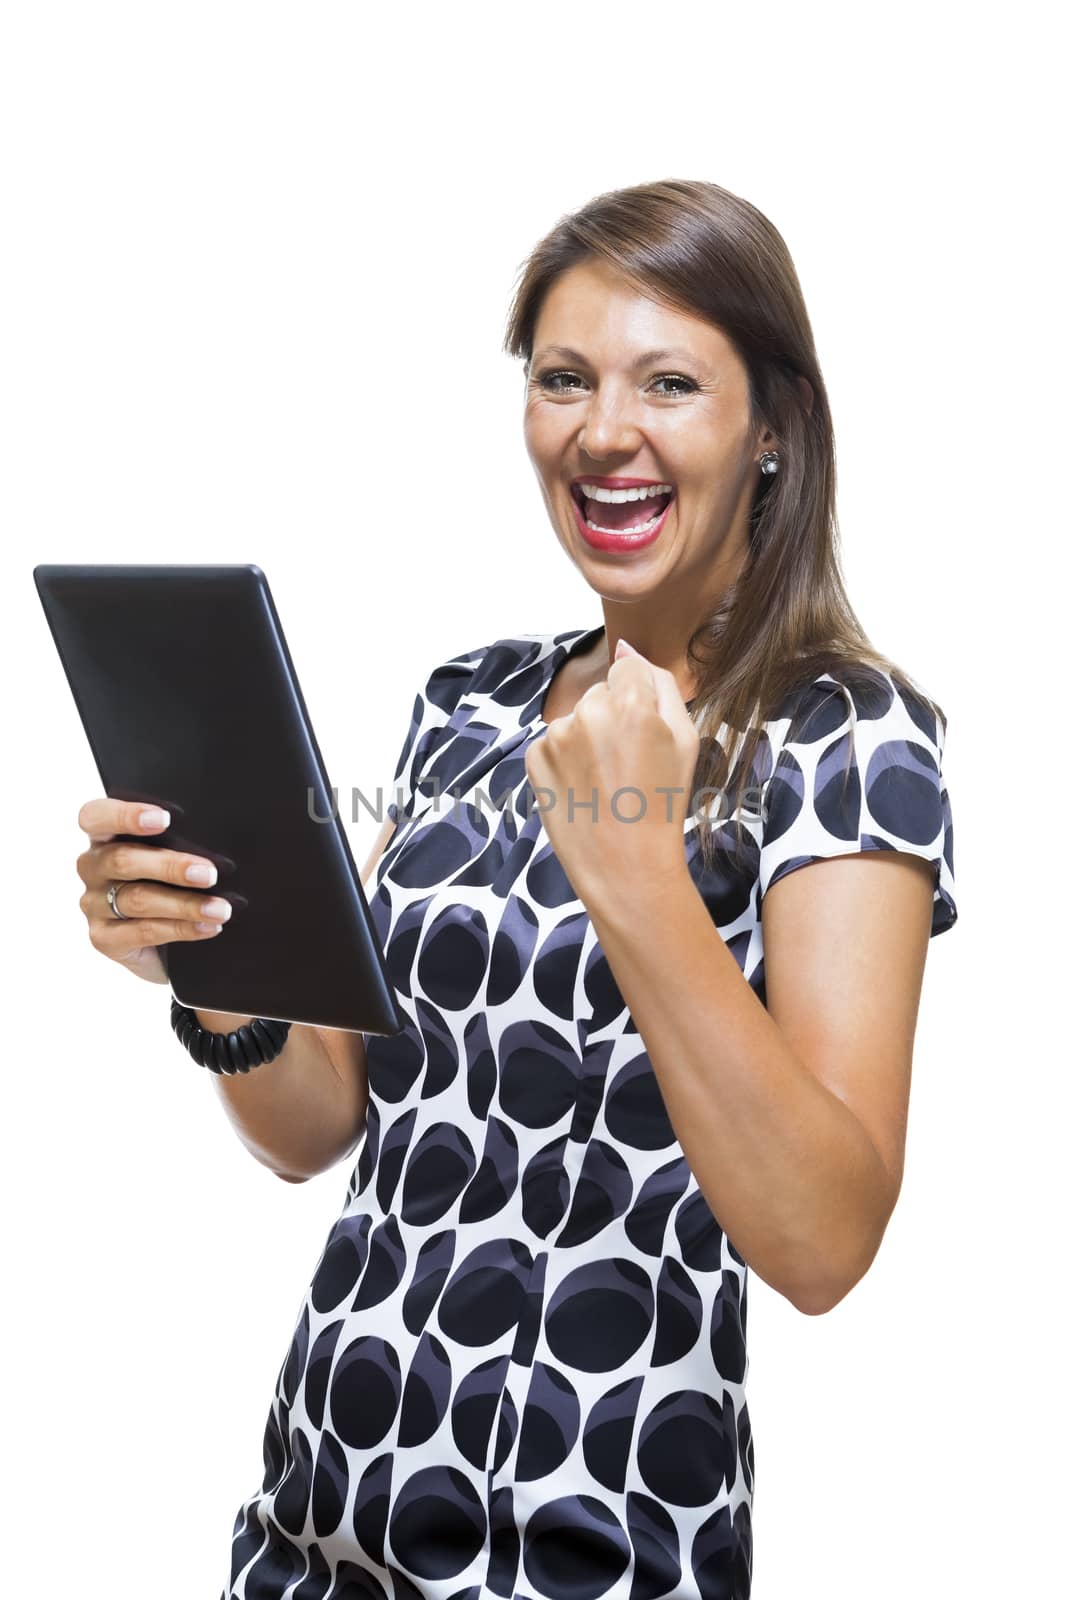 Smiling Woman in a Dress Holding a Tablet Computer by juniart